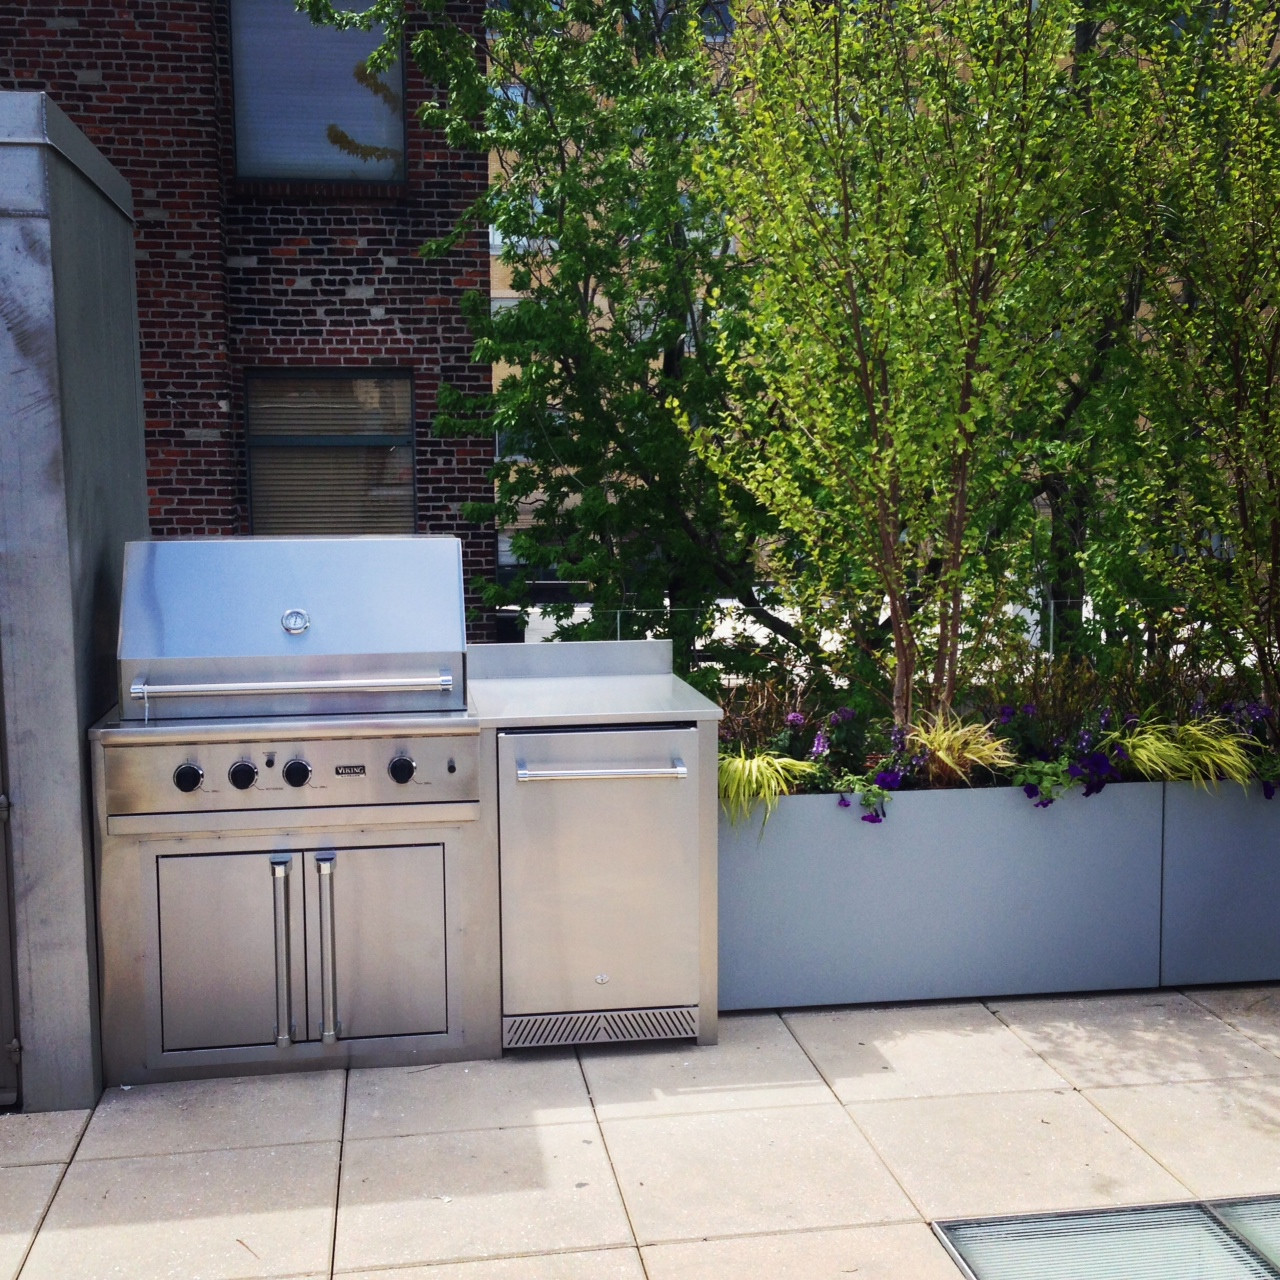 Nyc Fireplaces &amp; Outdoor Kitchens
 Viking Outdoor Kitchen